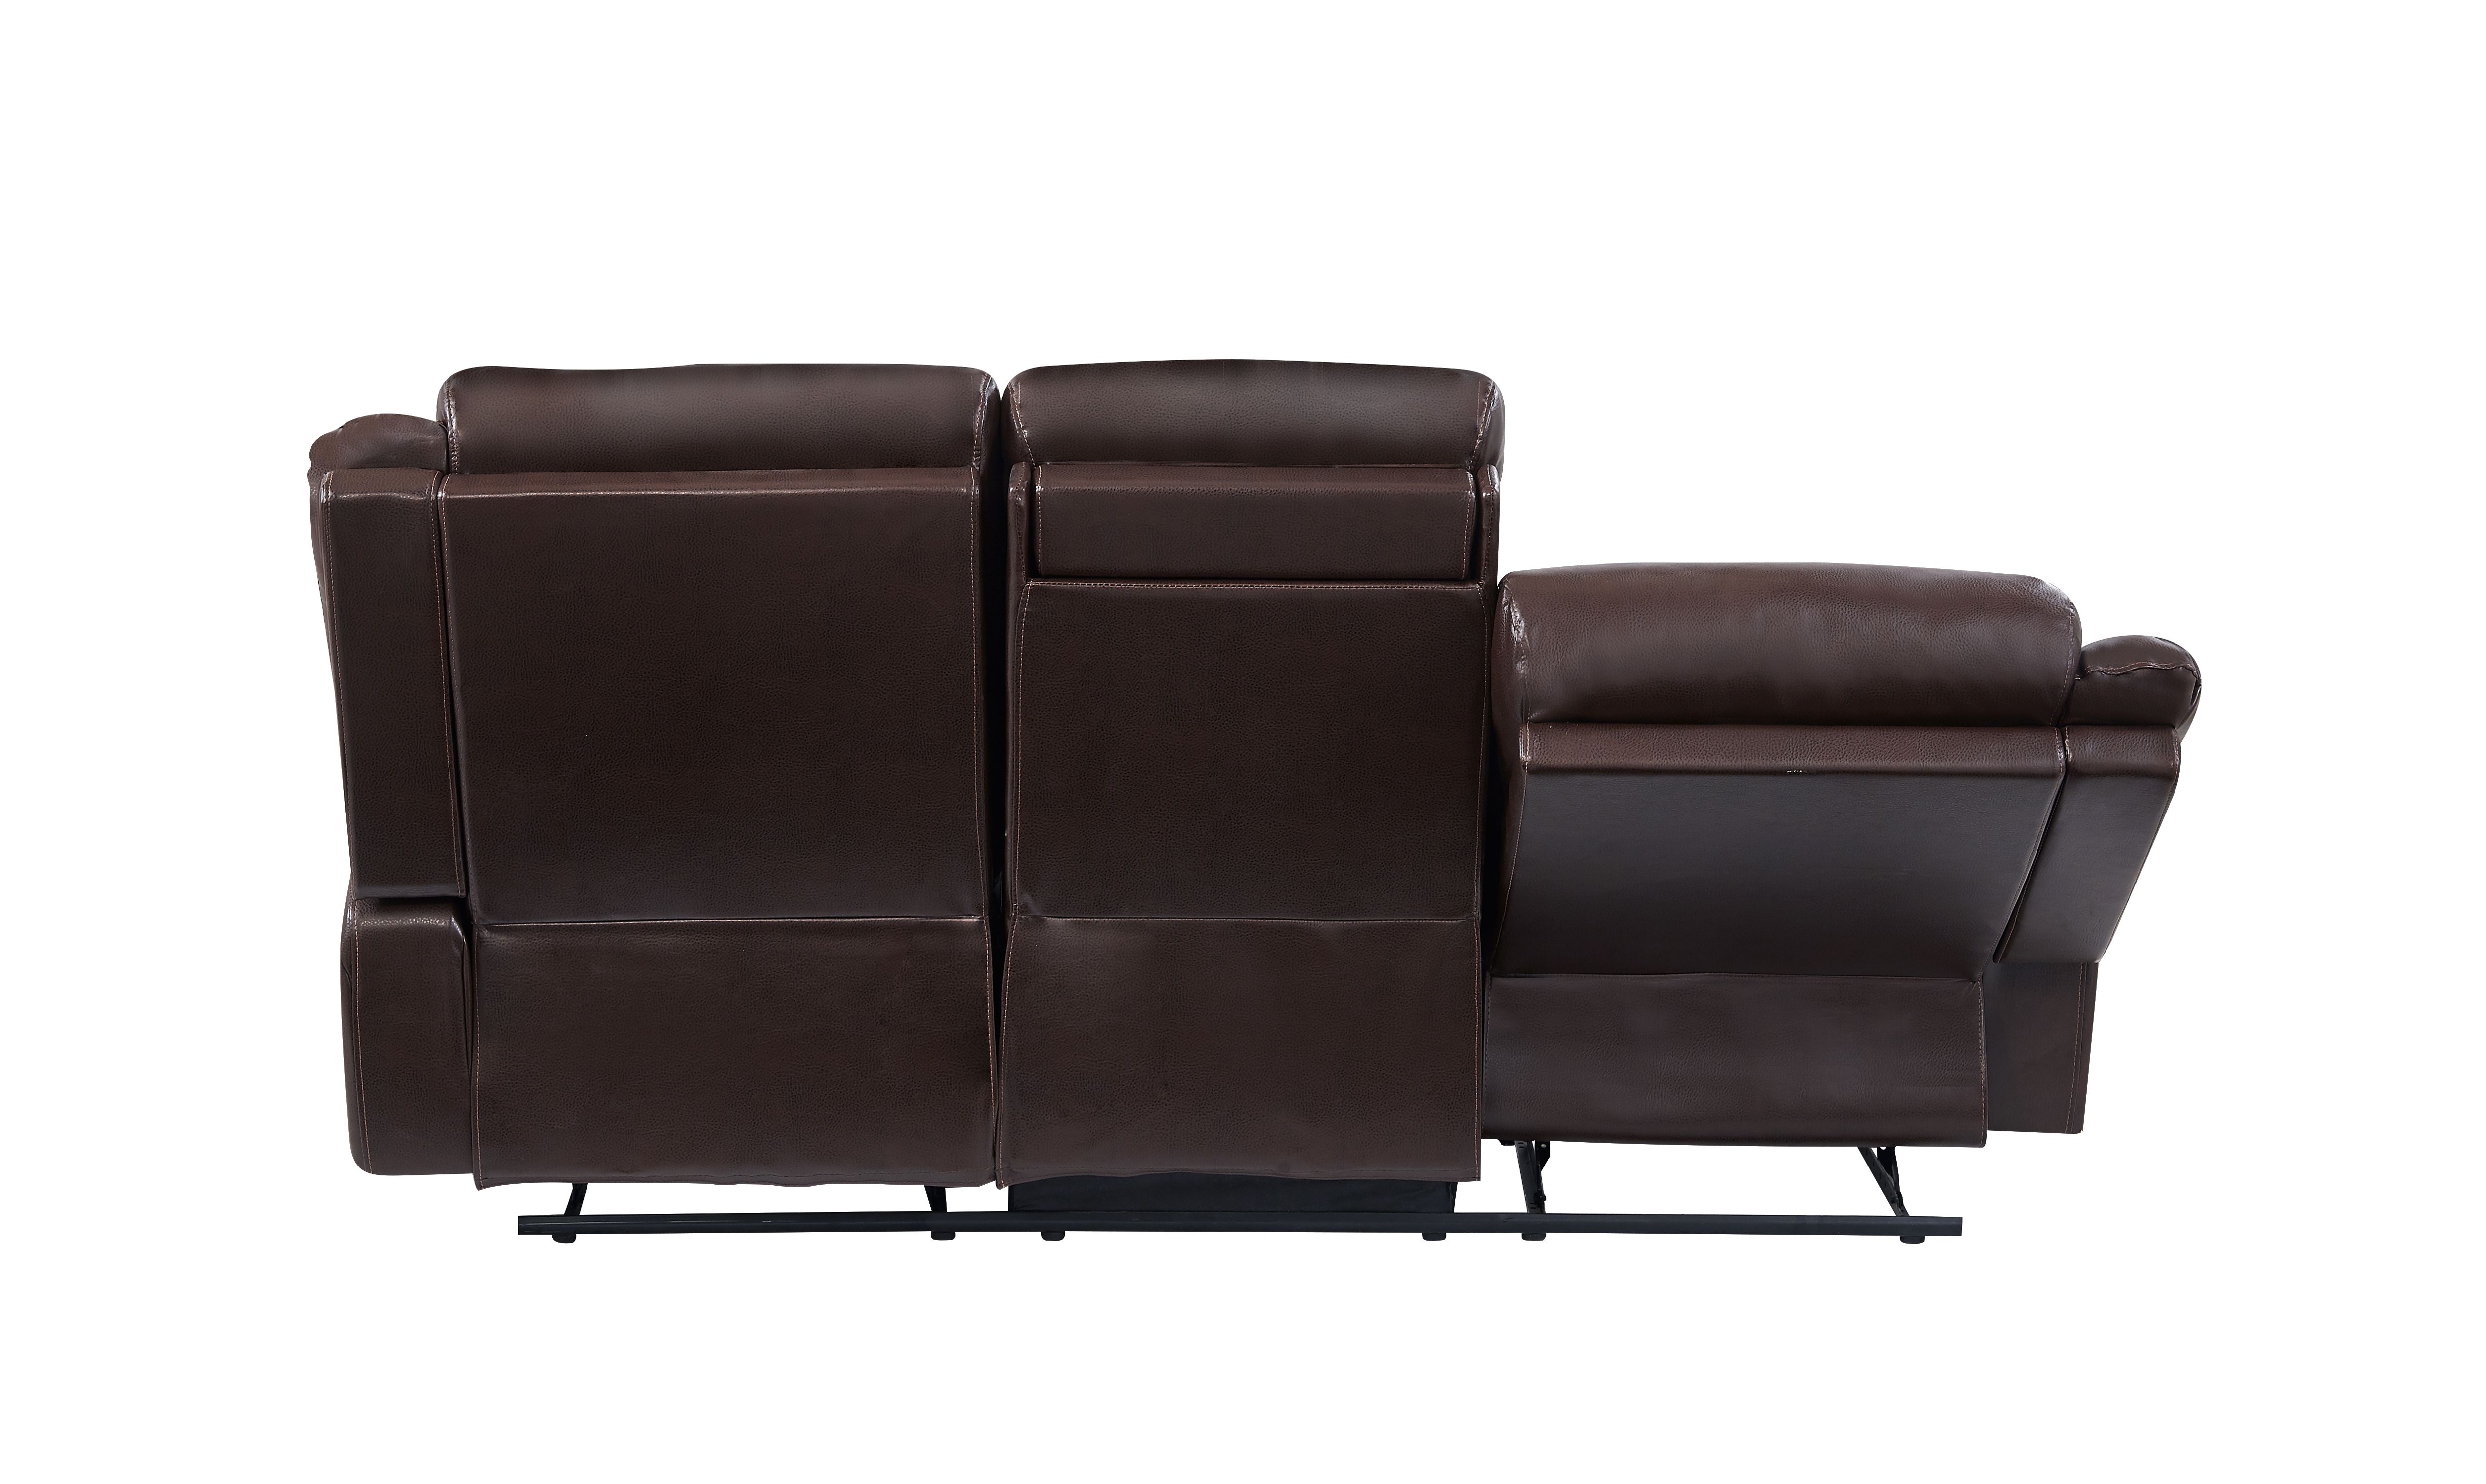 Drawer Reclining Sofa in Brown - image 8 of 10